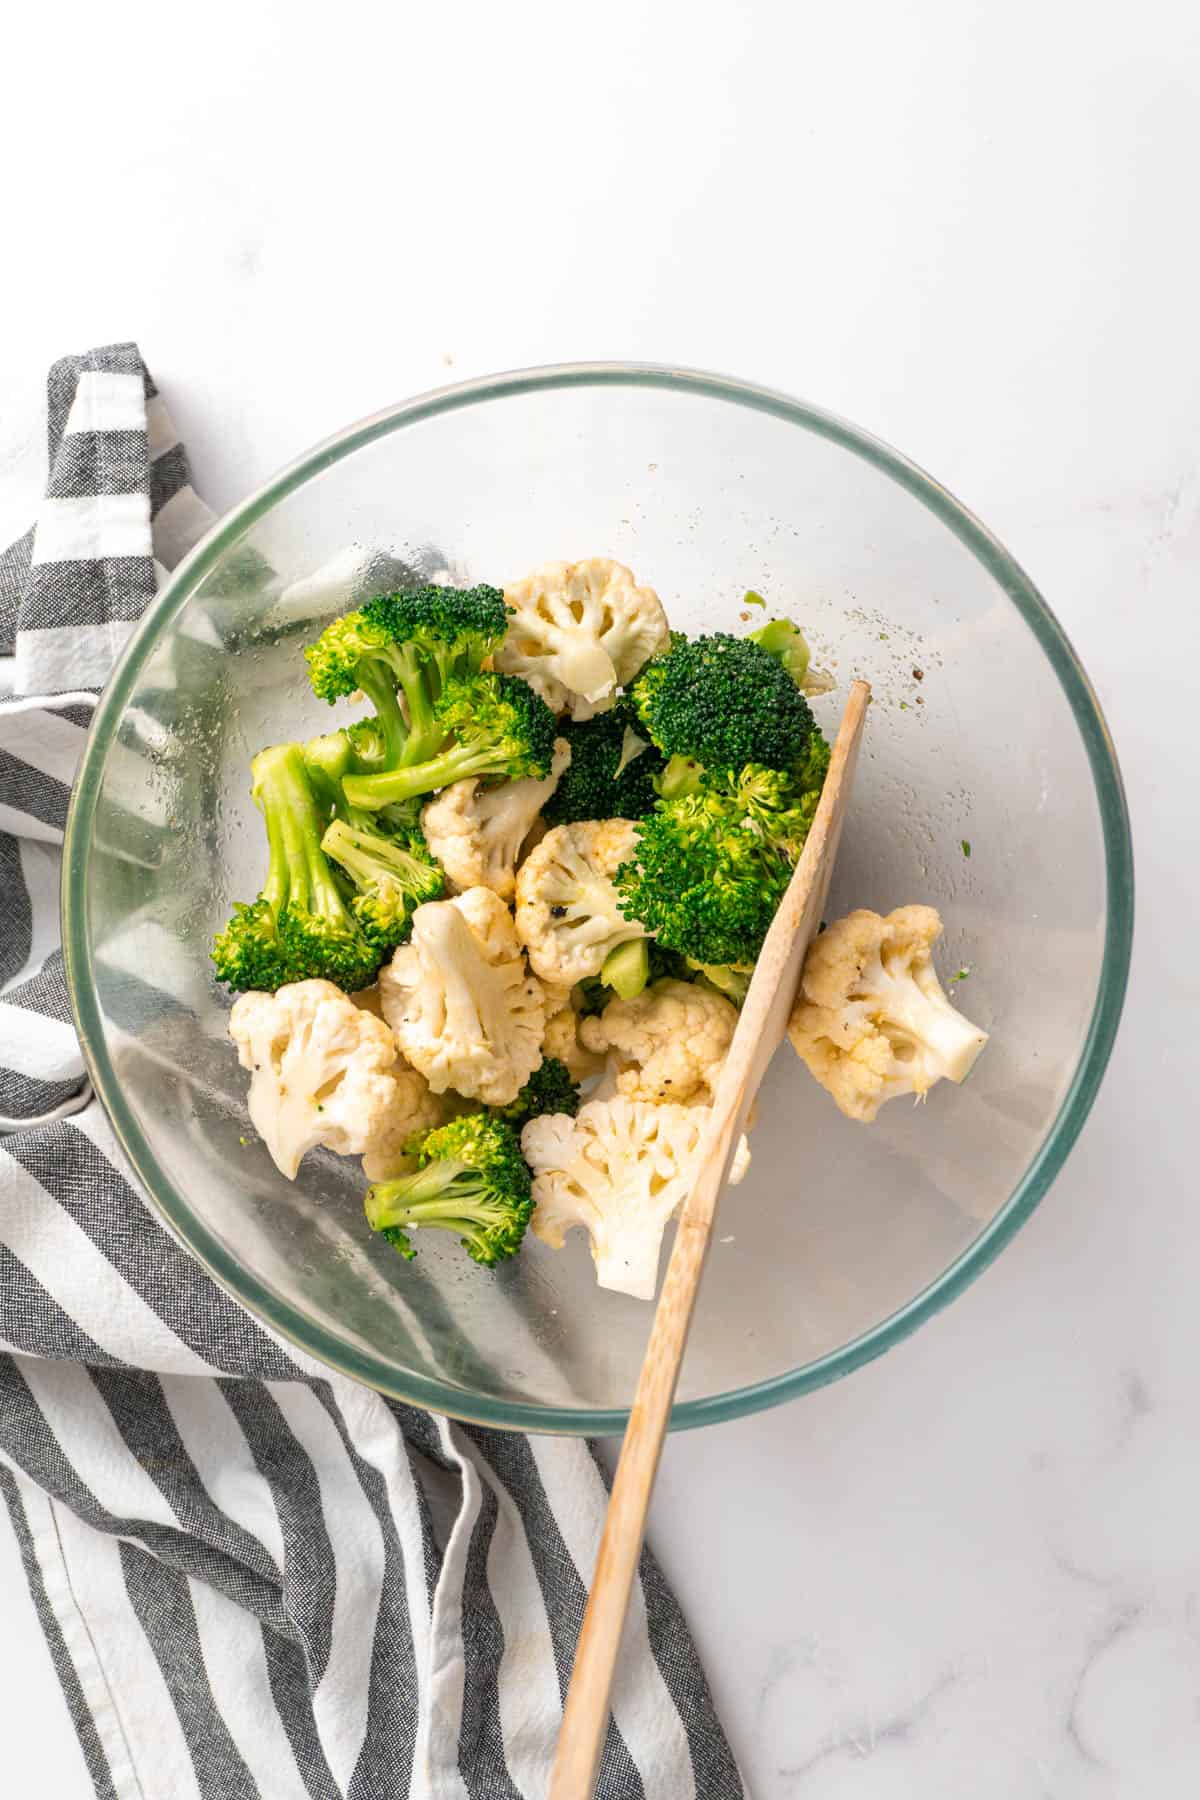 Cauliflower and broccoli are tossed with oil and seasonings in a large glass mixing bowl. 